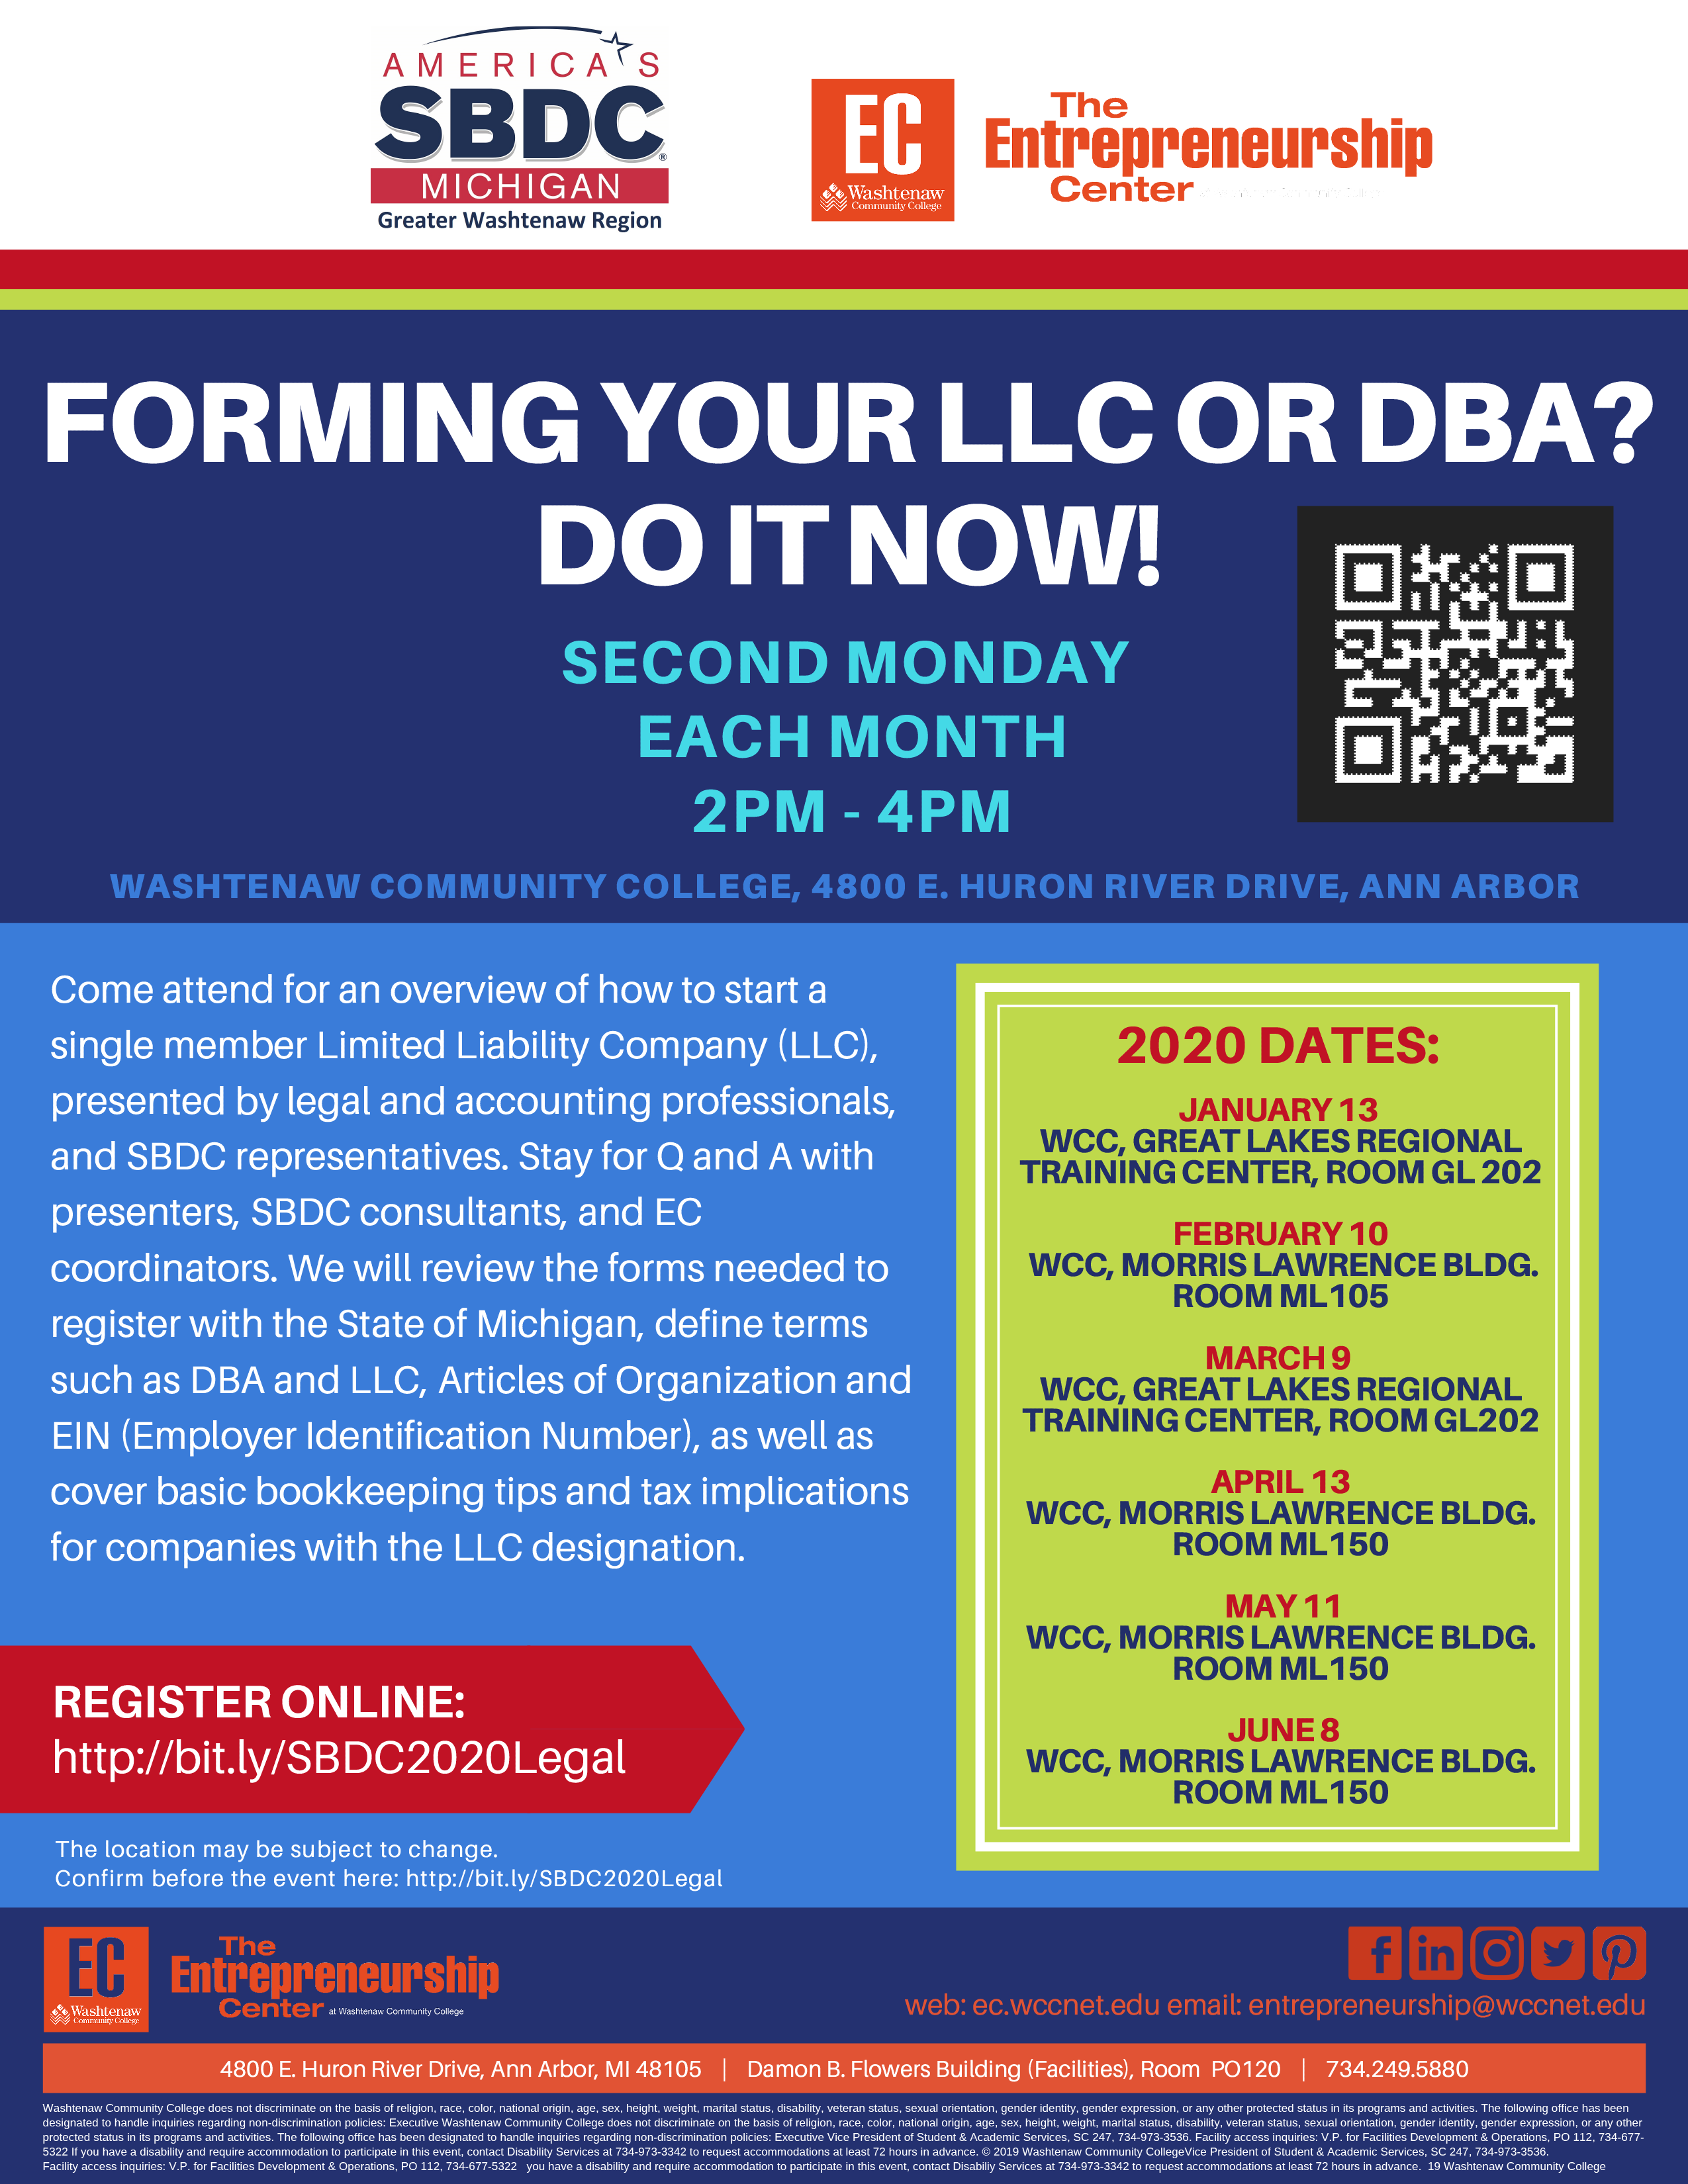 Forming Your LLC or DBA: Do it Now!